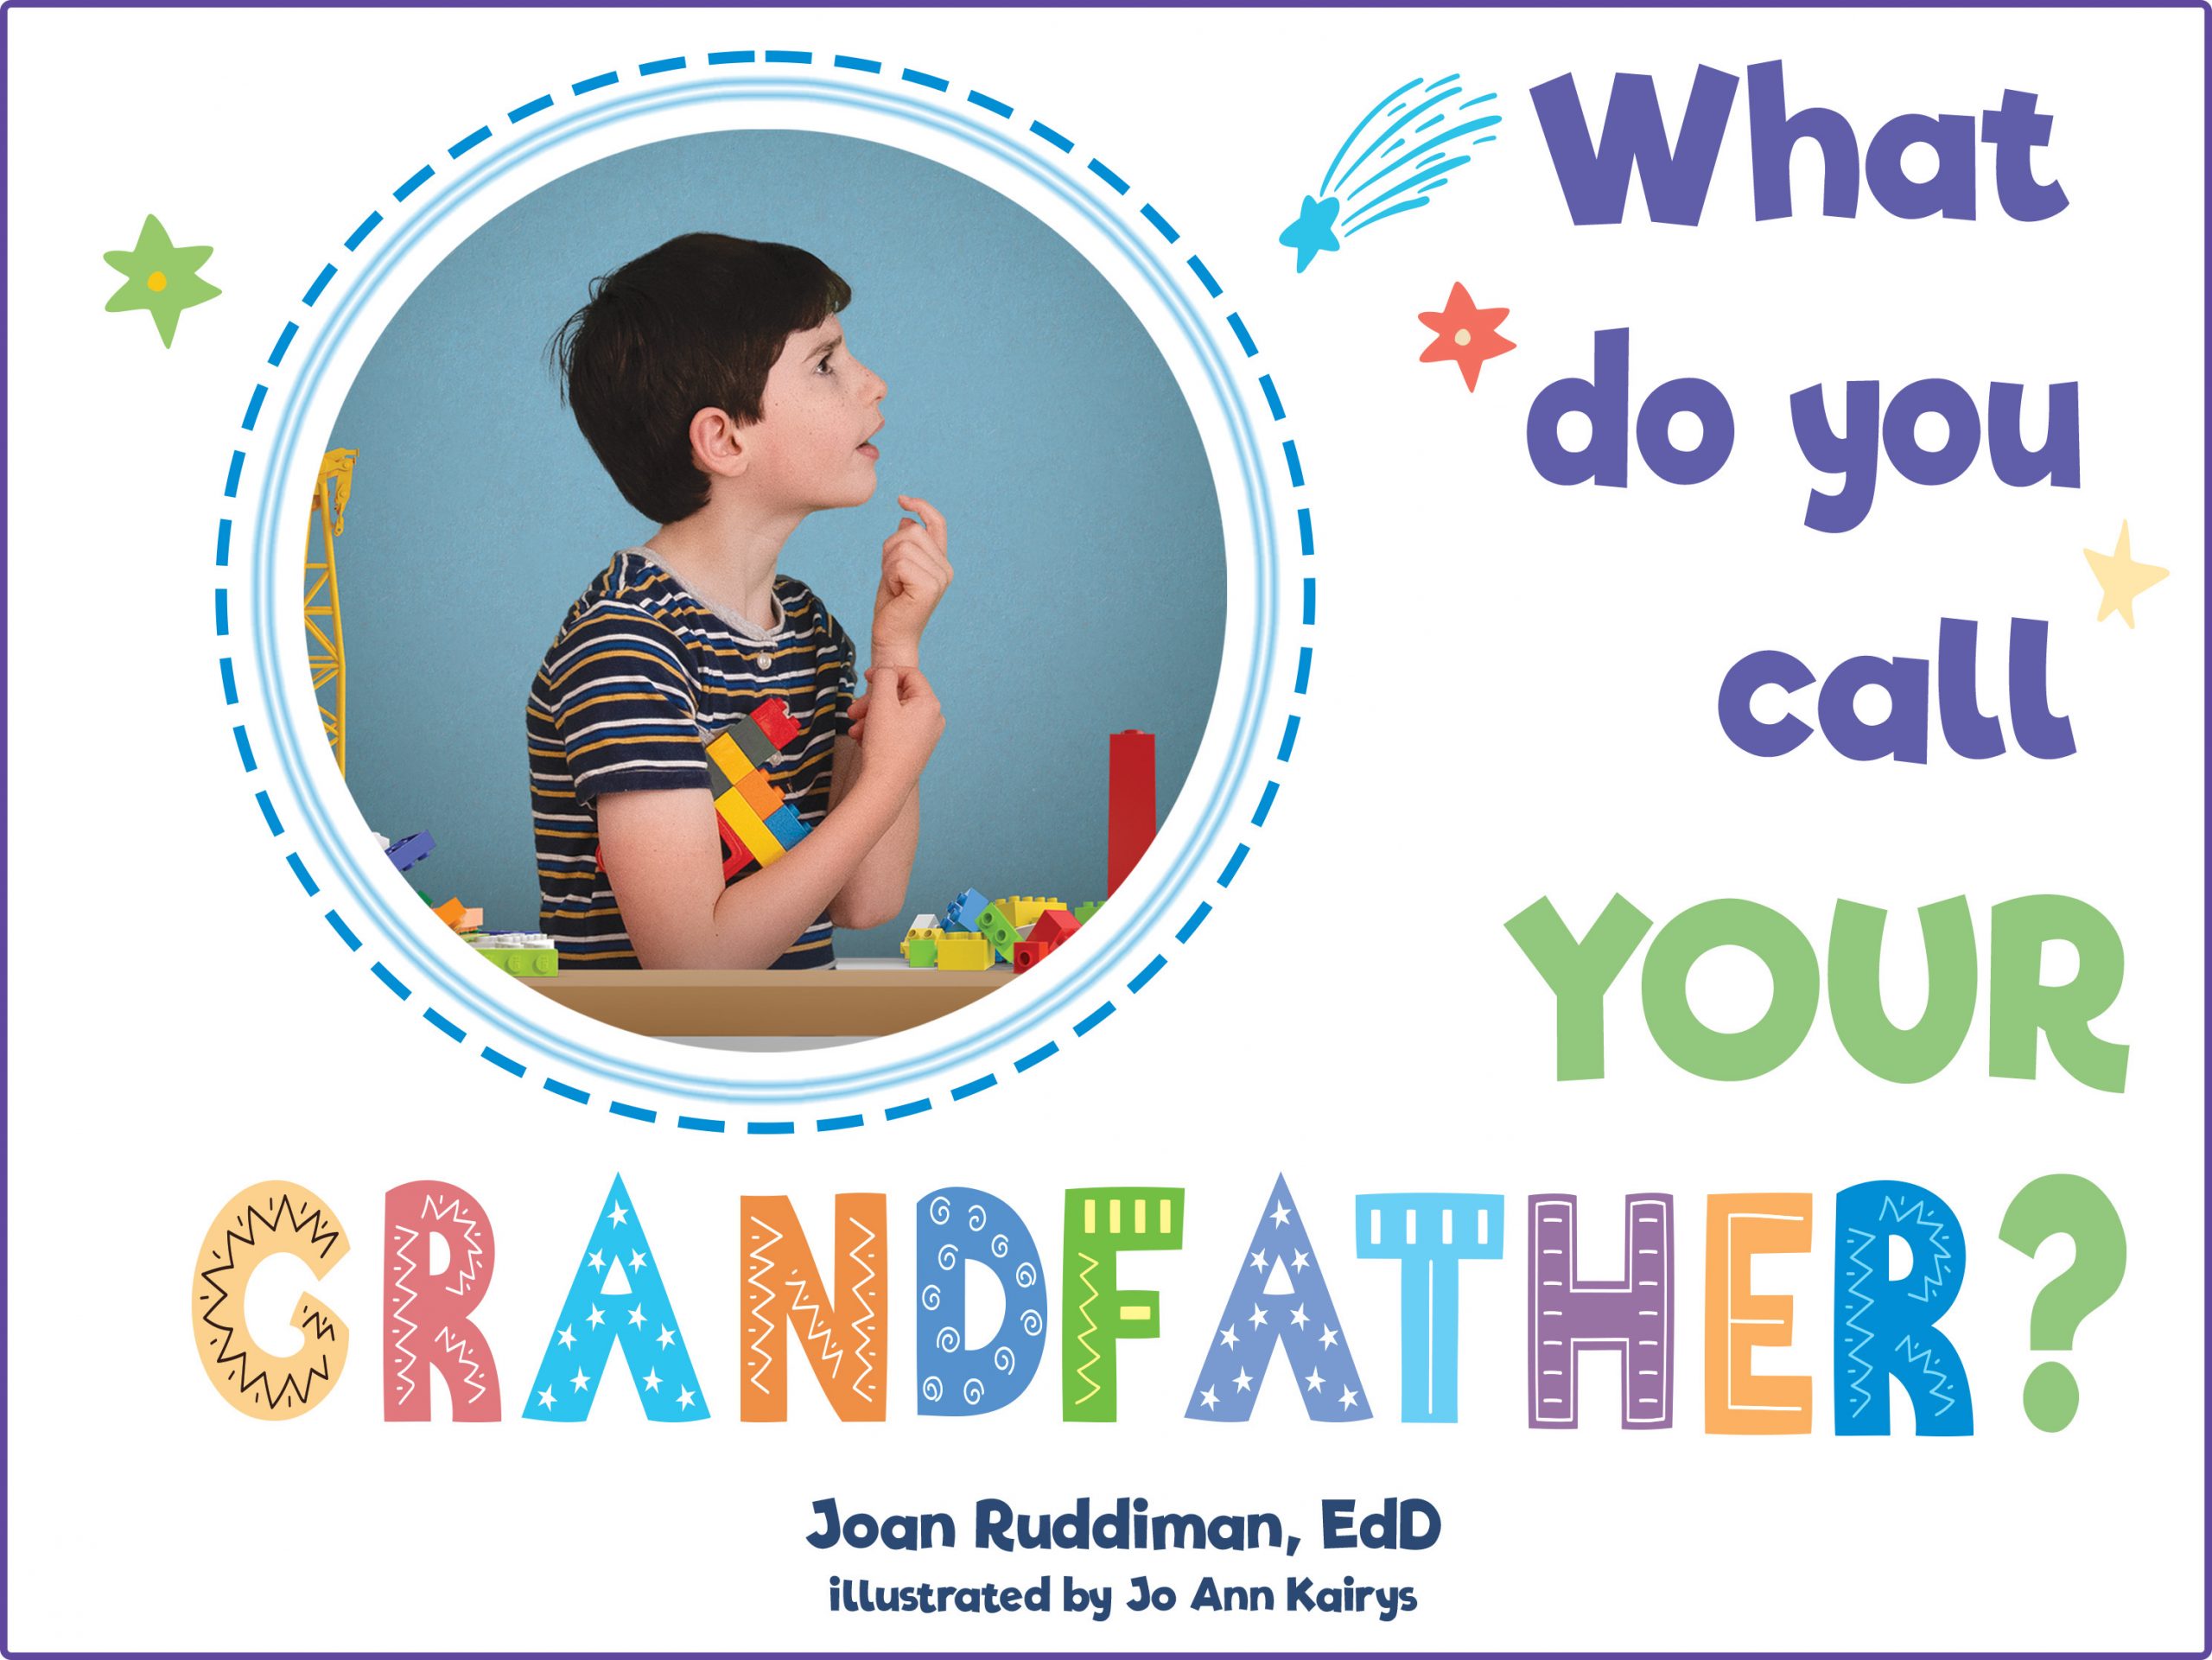 The cover of the Mom's Choice Award-winning book, "What Do You Call YOUR Grandfather?"